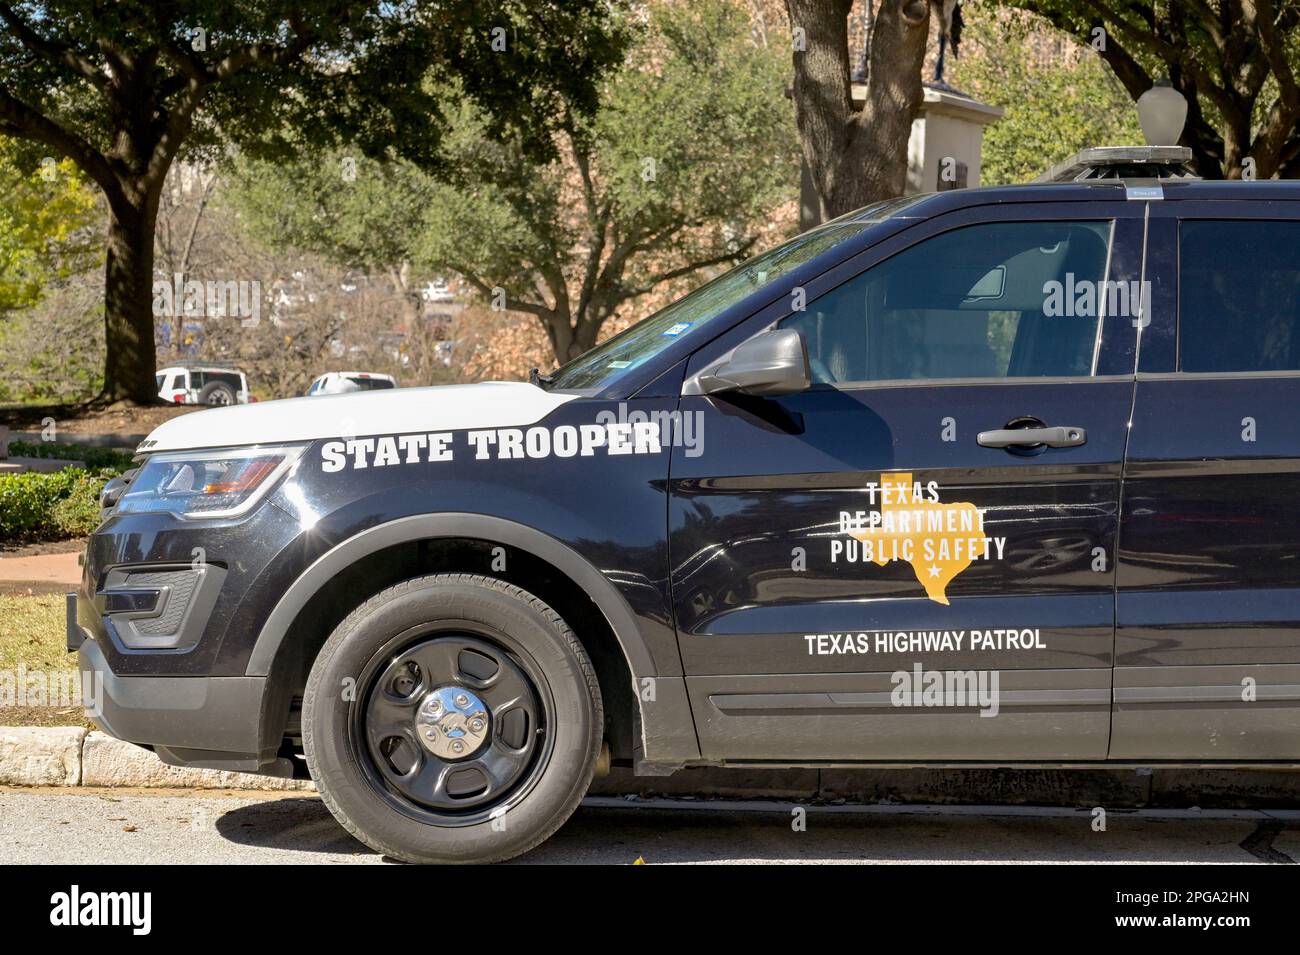 Austin, Texas, USA - February 2023: State Trooper police patrol car of the Texas Highway Patrol parked on a street in the city centre Stock Photo